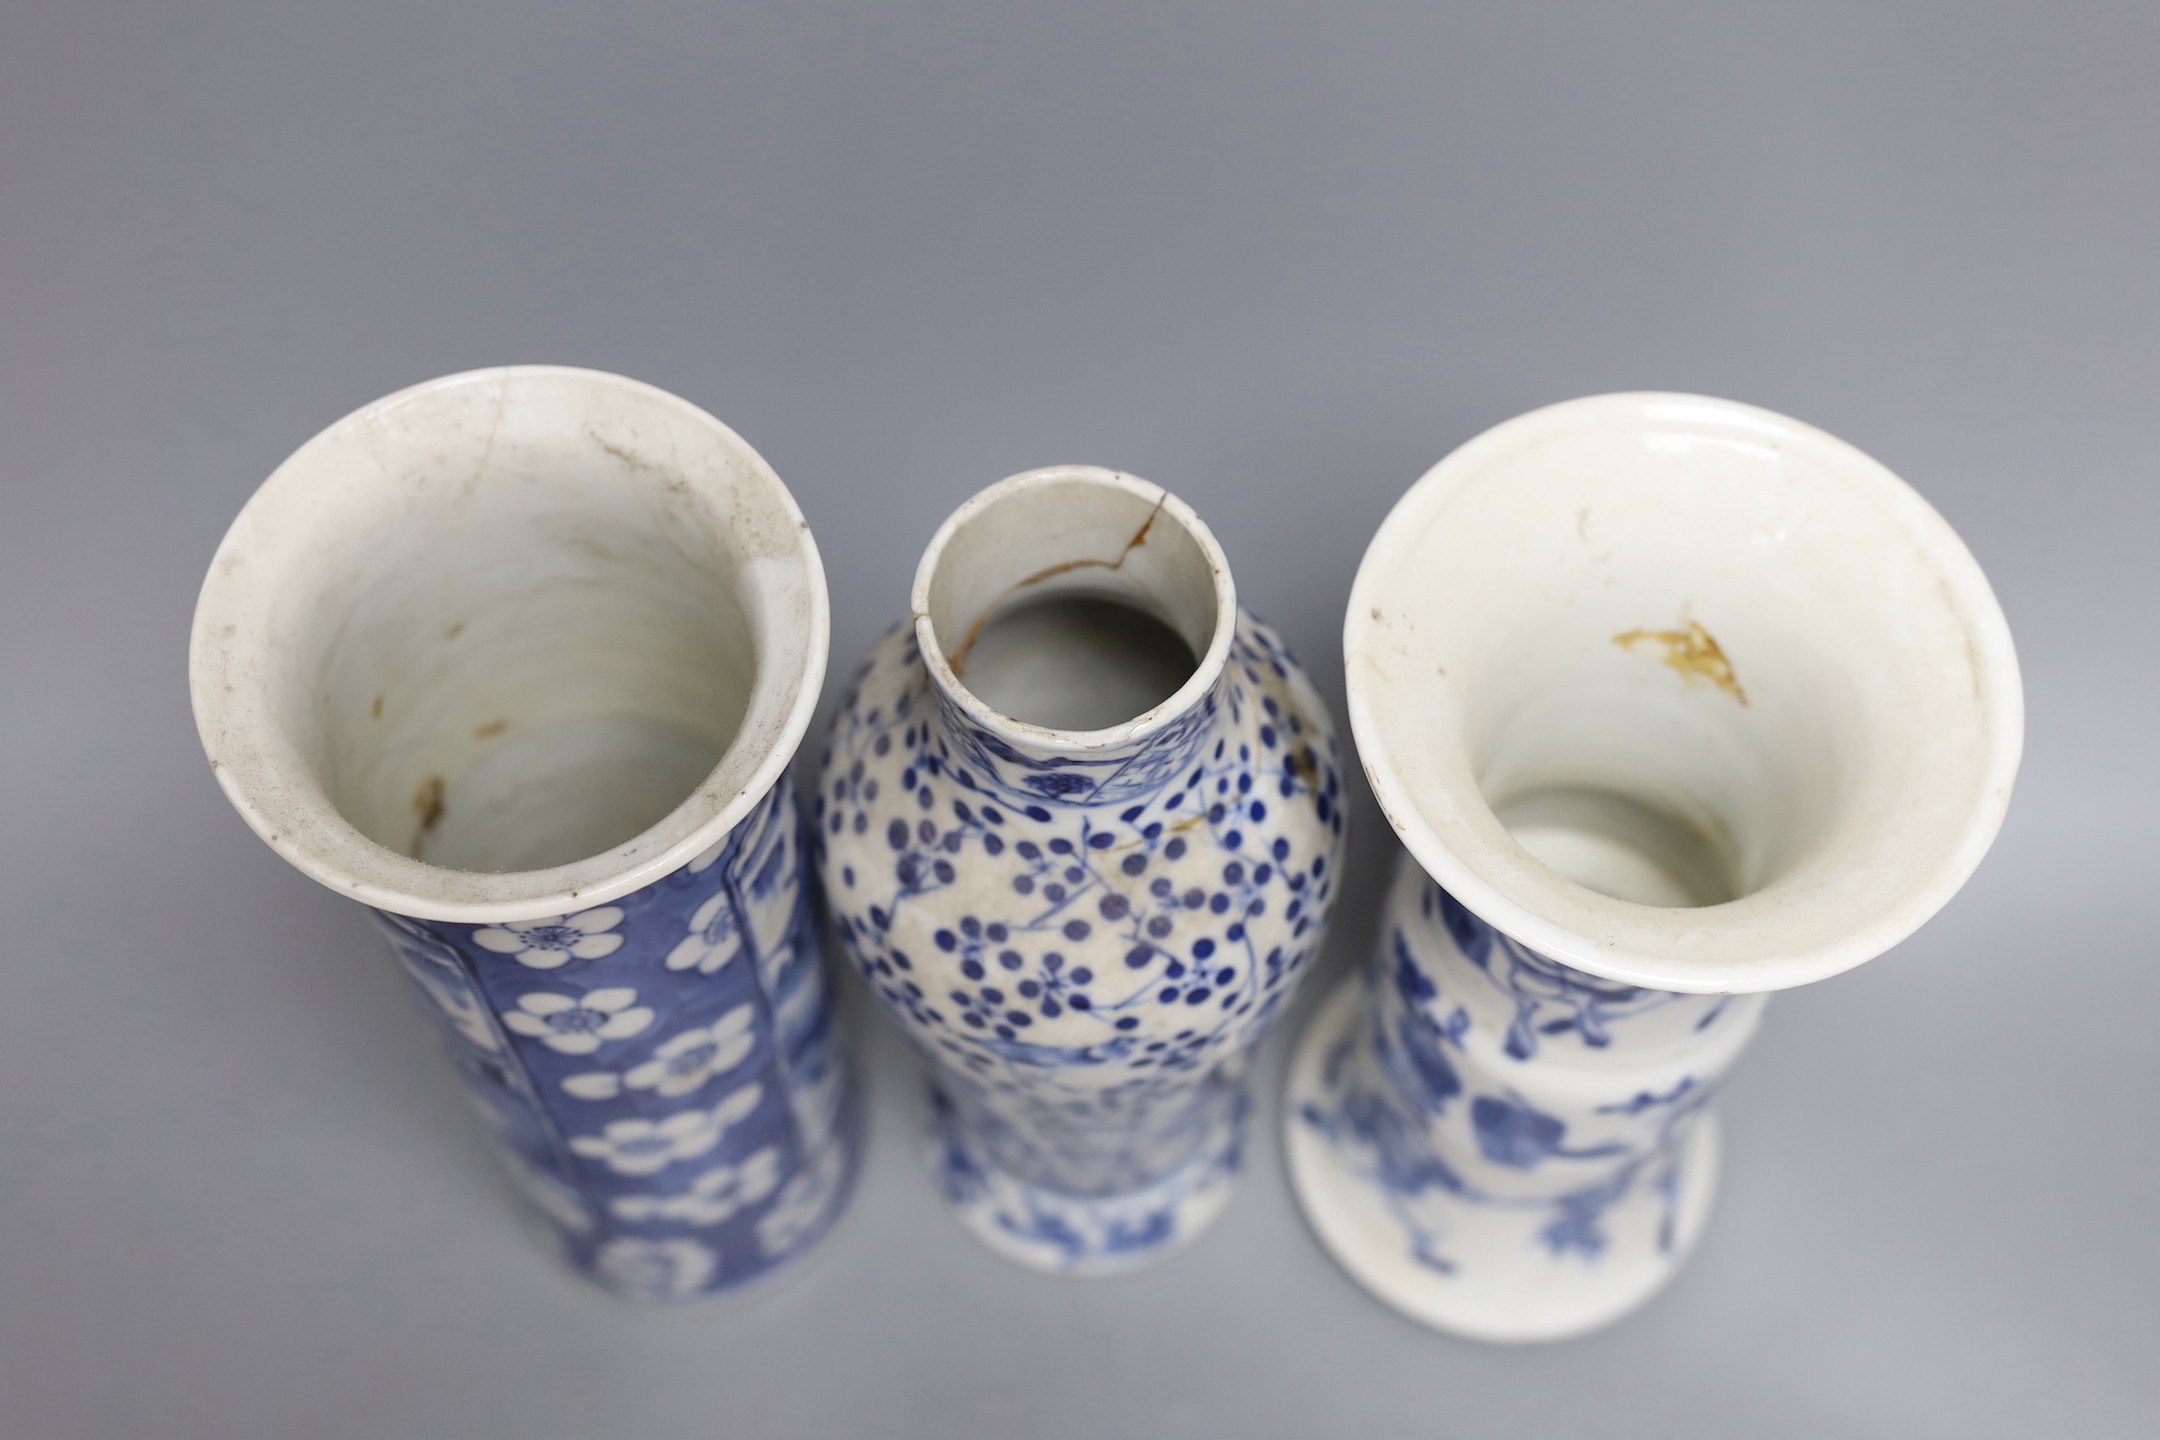 A Chinese blue and white sleeve vase and two other similar vases, late Qing dynasty, tallest 21 cms high